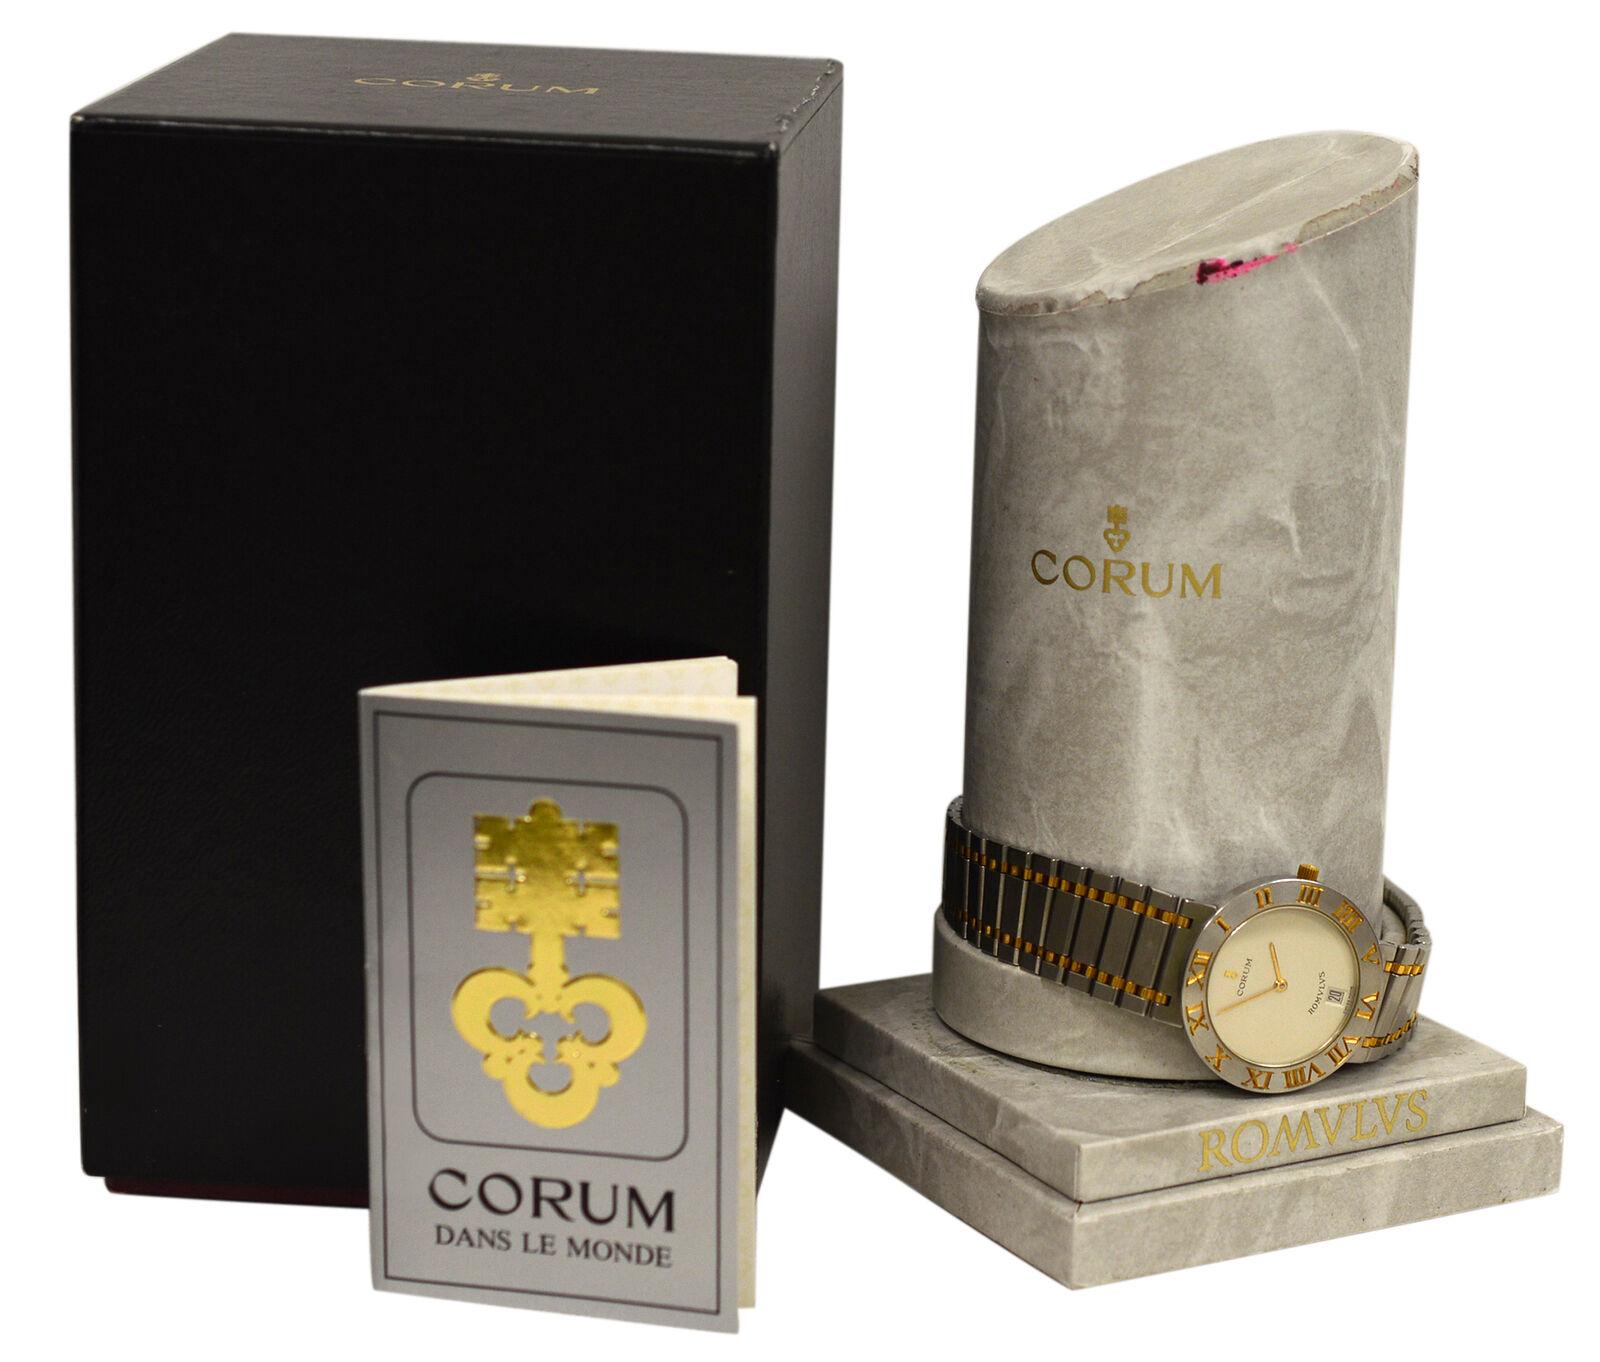 Brand	Corum
Model	Romvlvs 43.903.21V48
Gender	Ladies'
Condition	New store display
Movement	Swiss Quartz
Case Material	18K Yellow Gold and Stainless Steel
Bracelet / Strap Material	
18K Yellow Gold and Stainless Steel

Clasp / Buckle